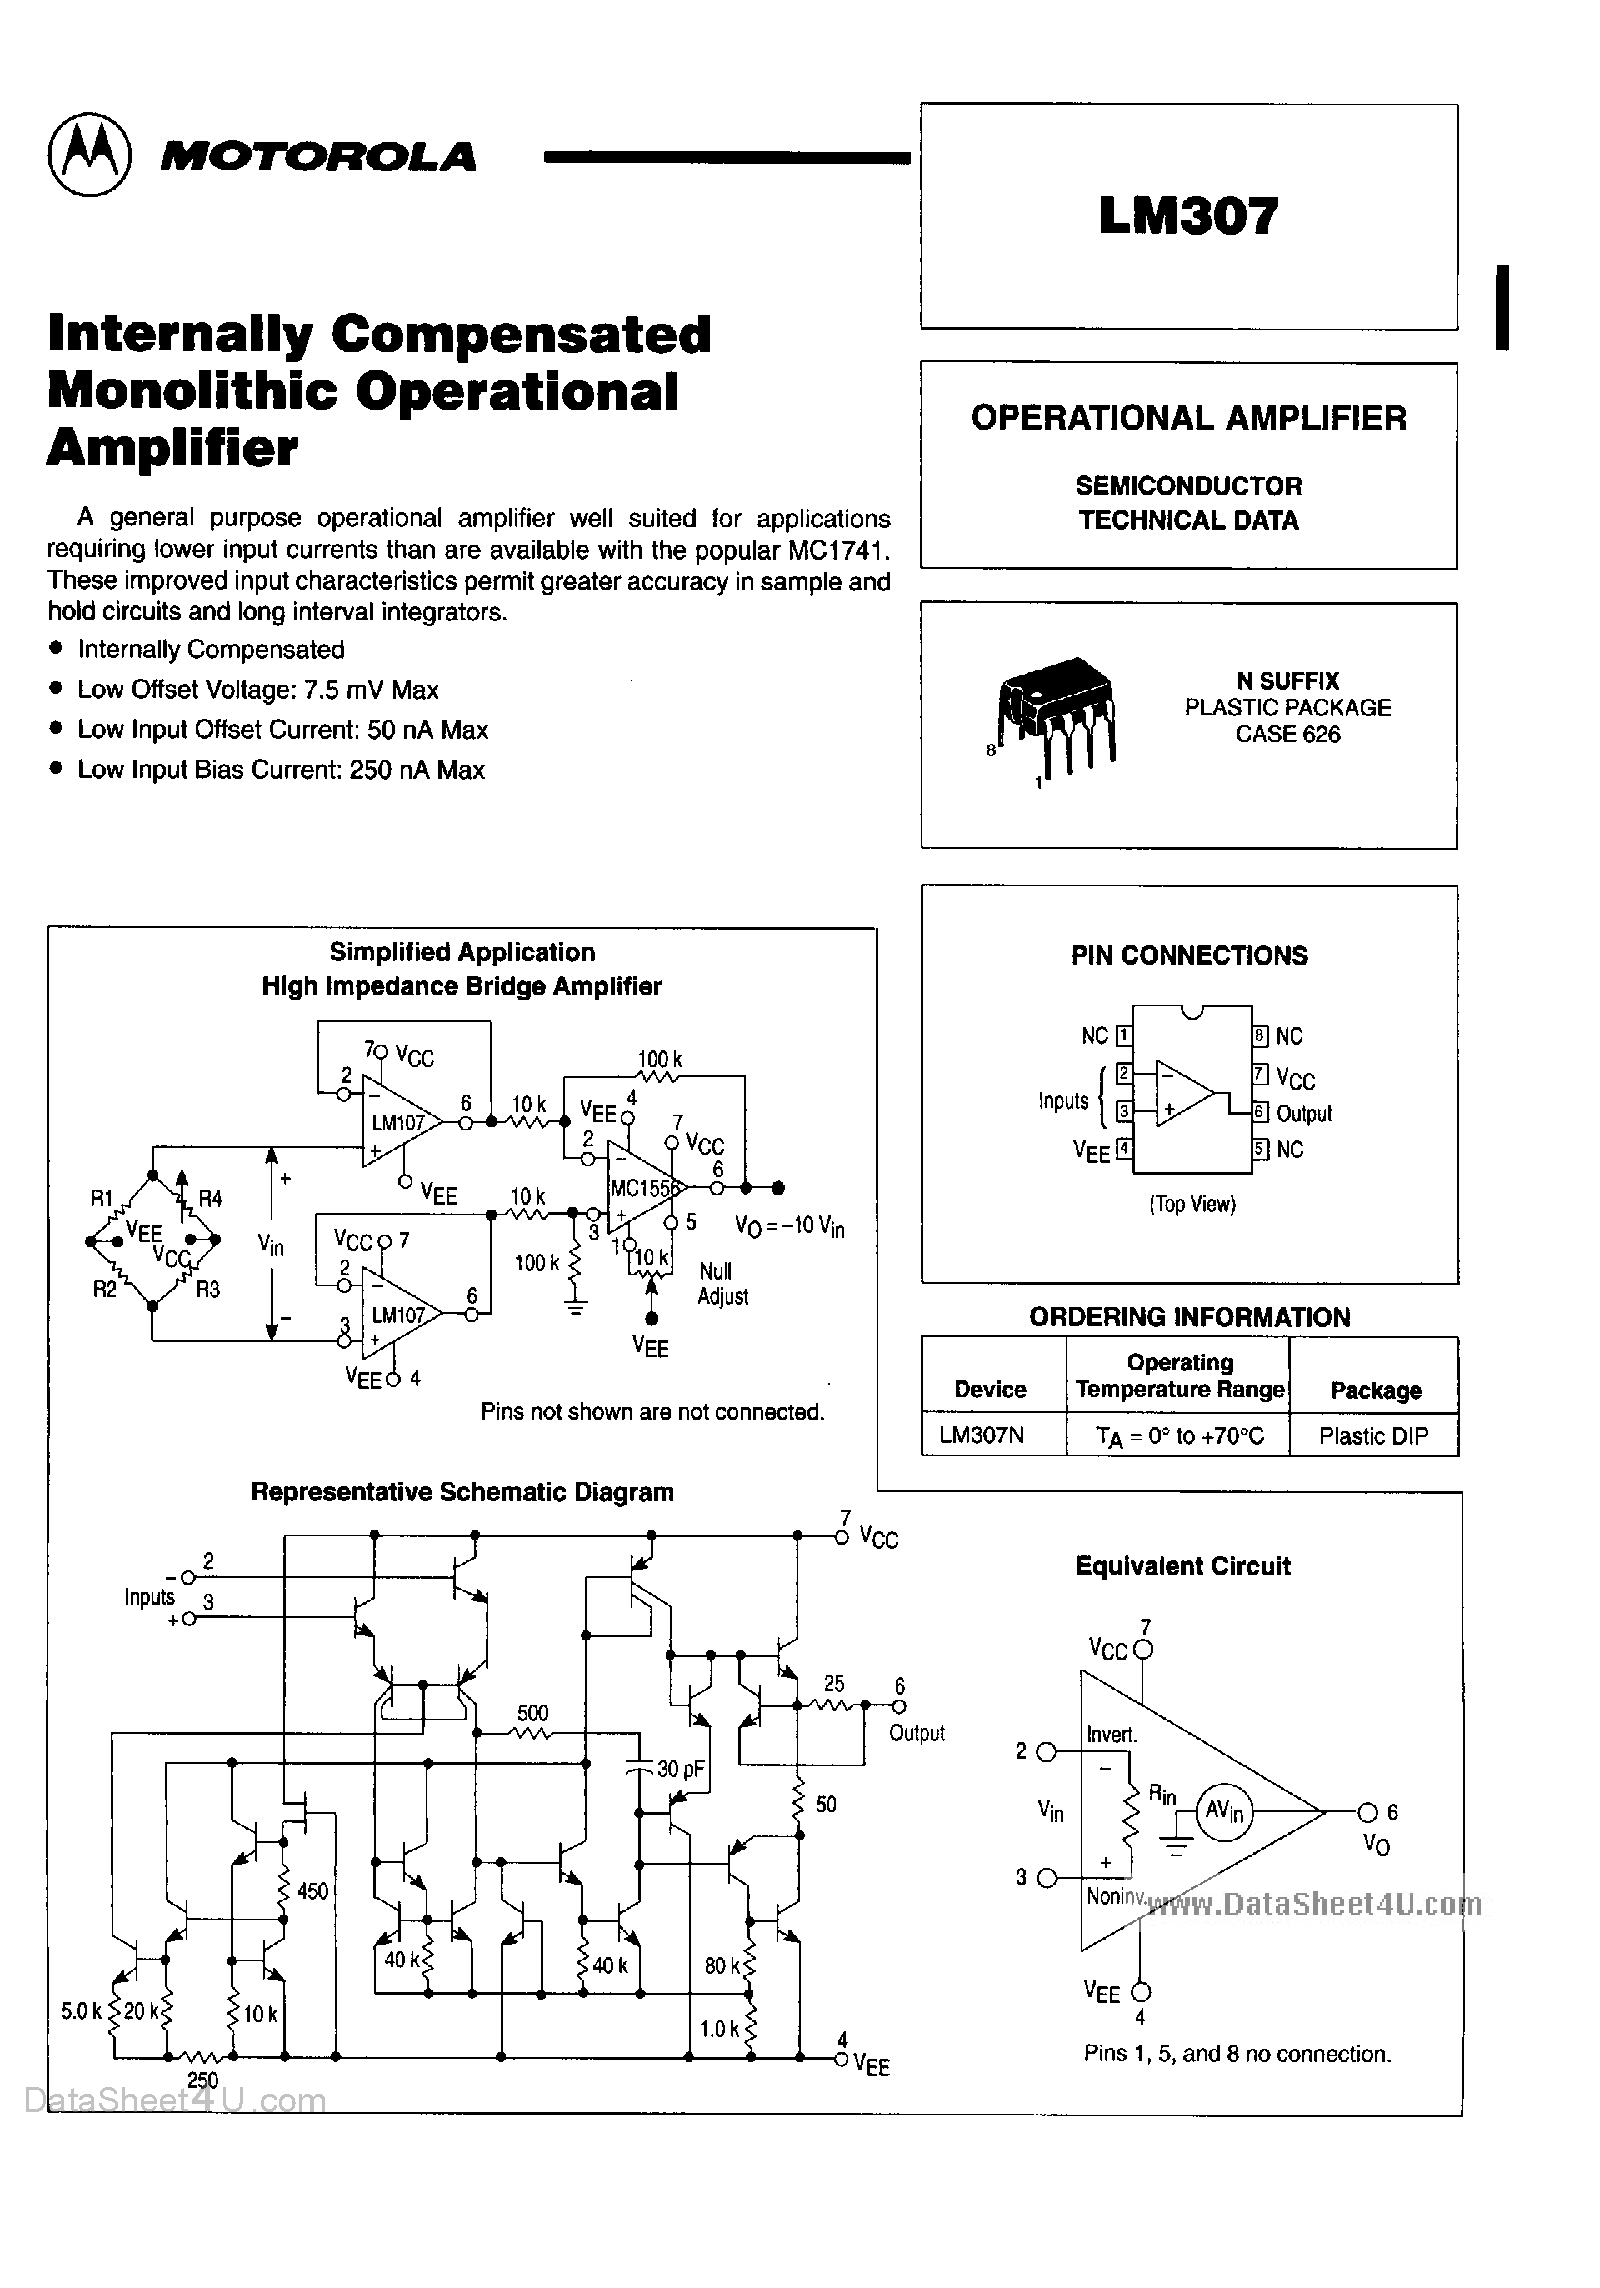 Datasheet MLM307 - Interna;;y Compensated Monolithic Operational Amplifier page 1